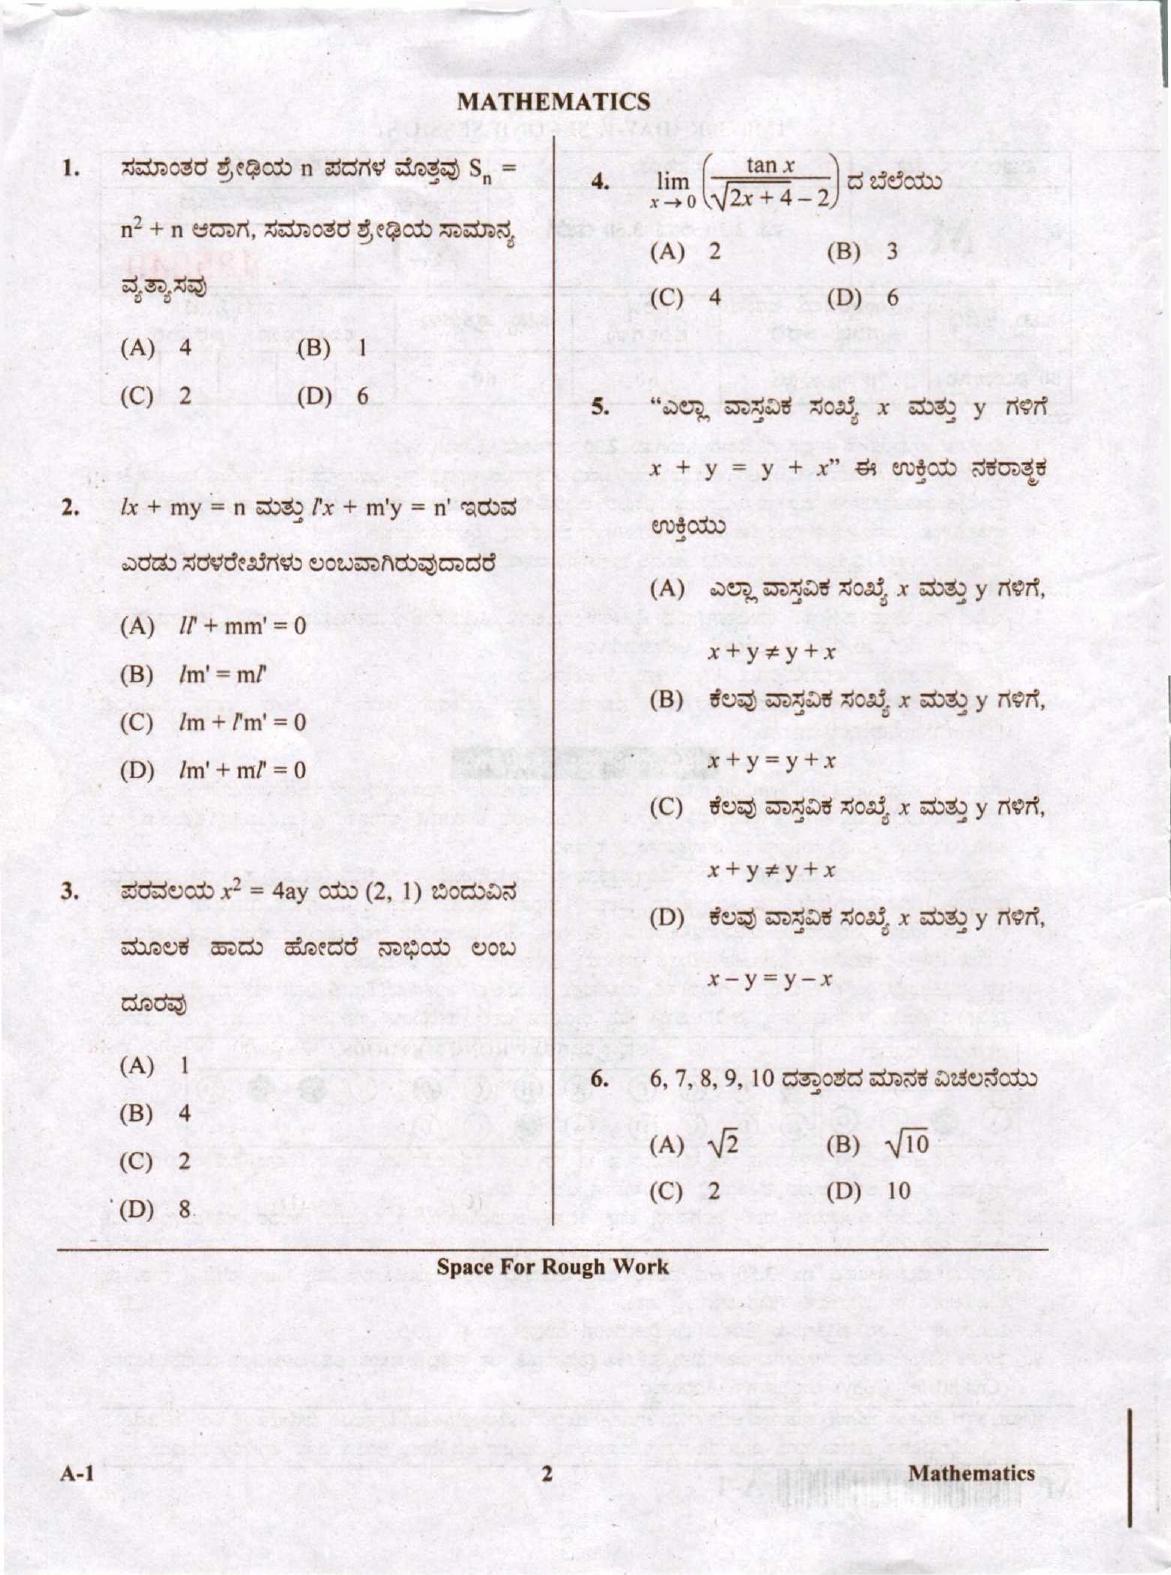 KCET Mathematics 2020 Question Papers - Page 2